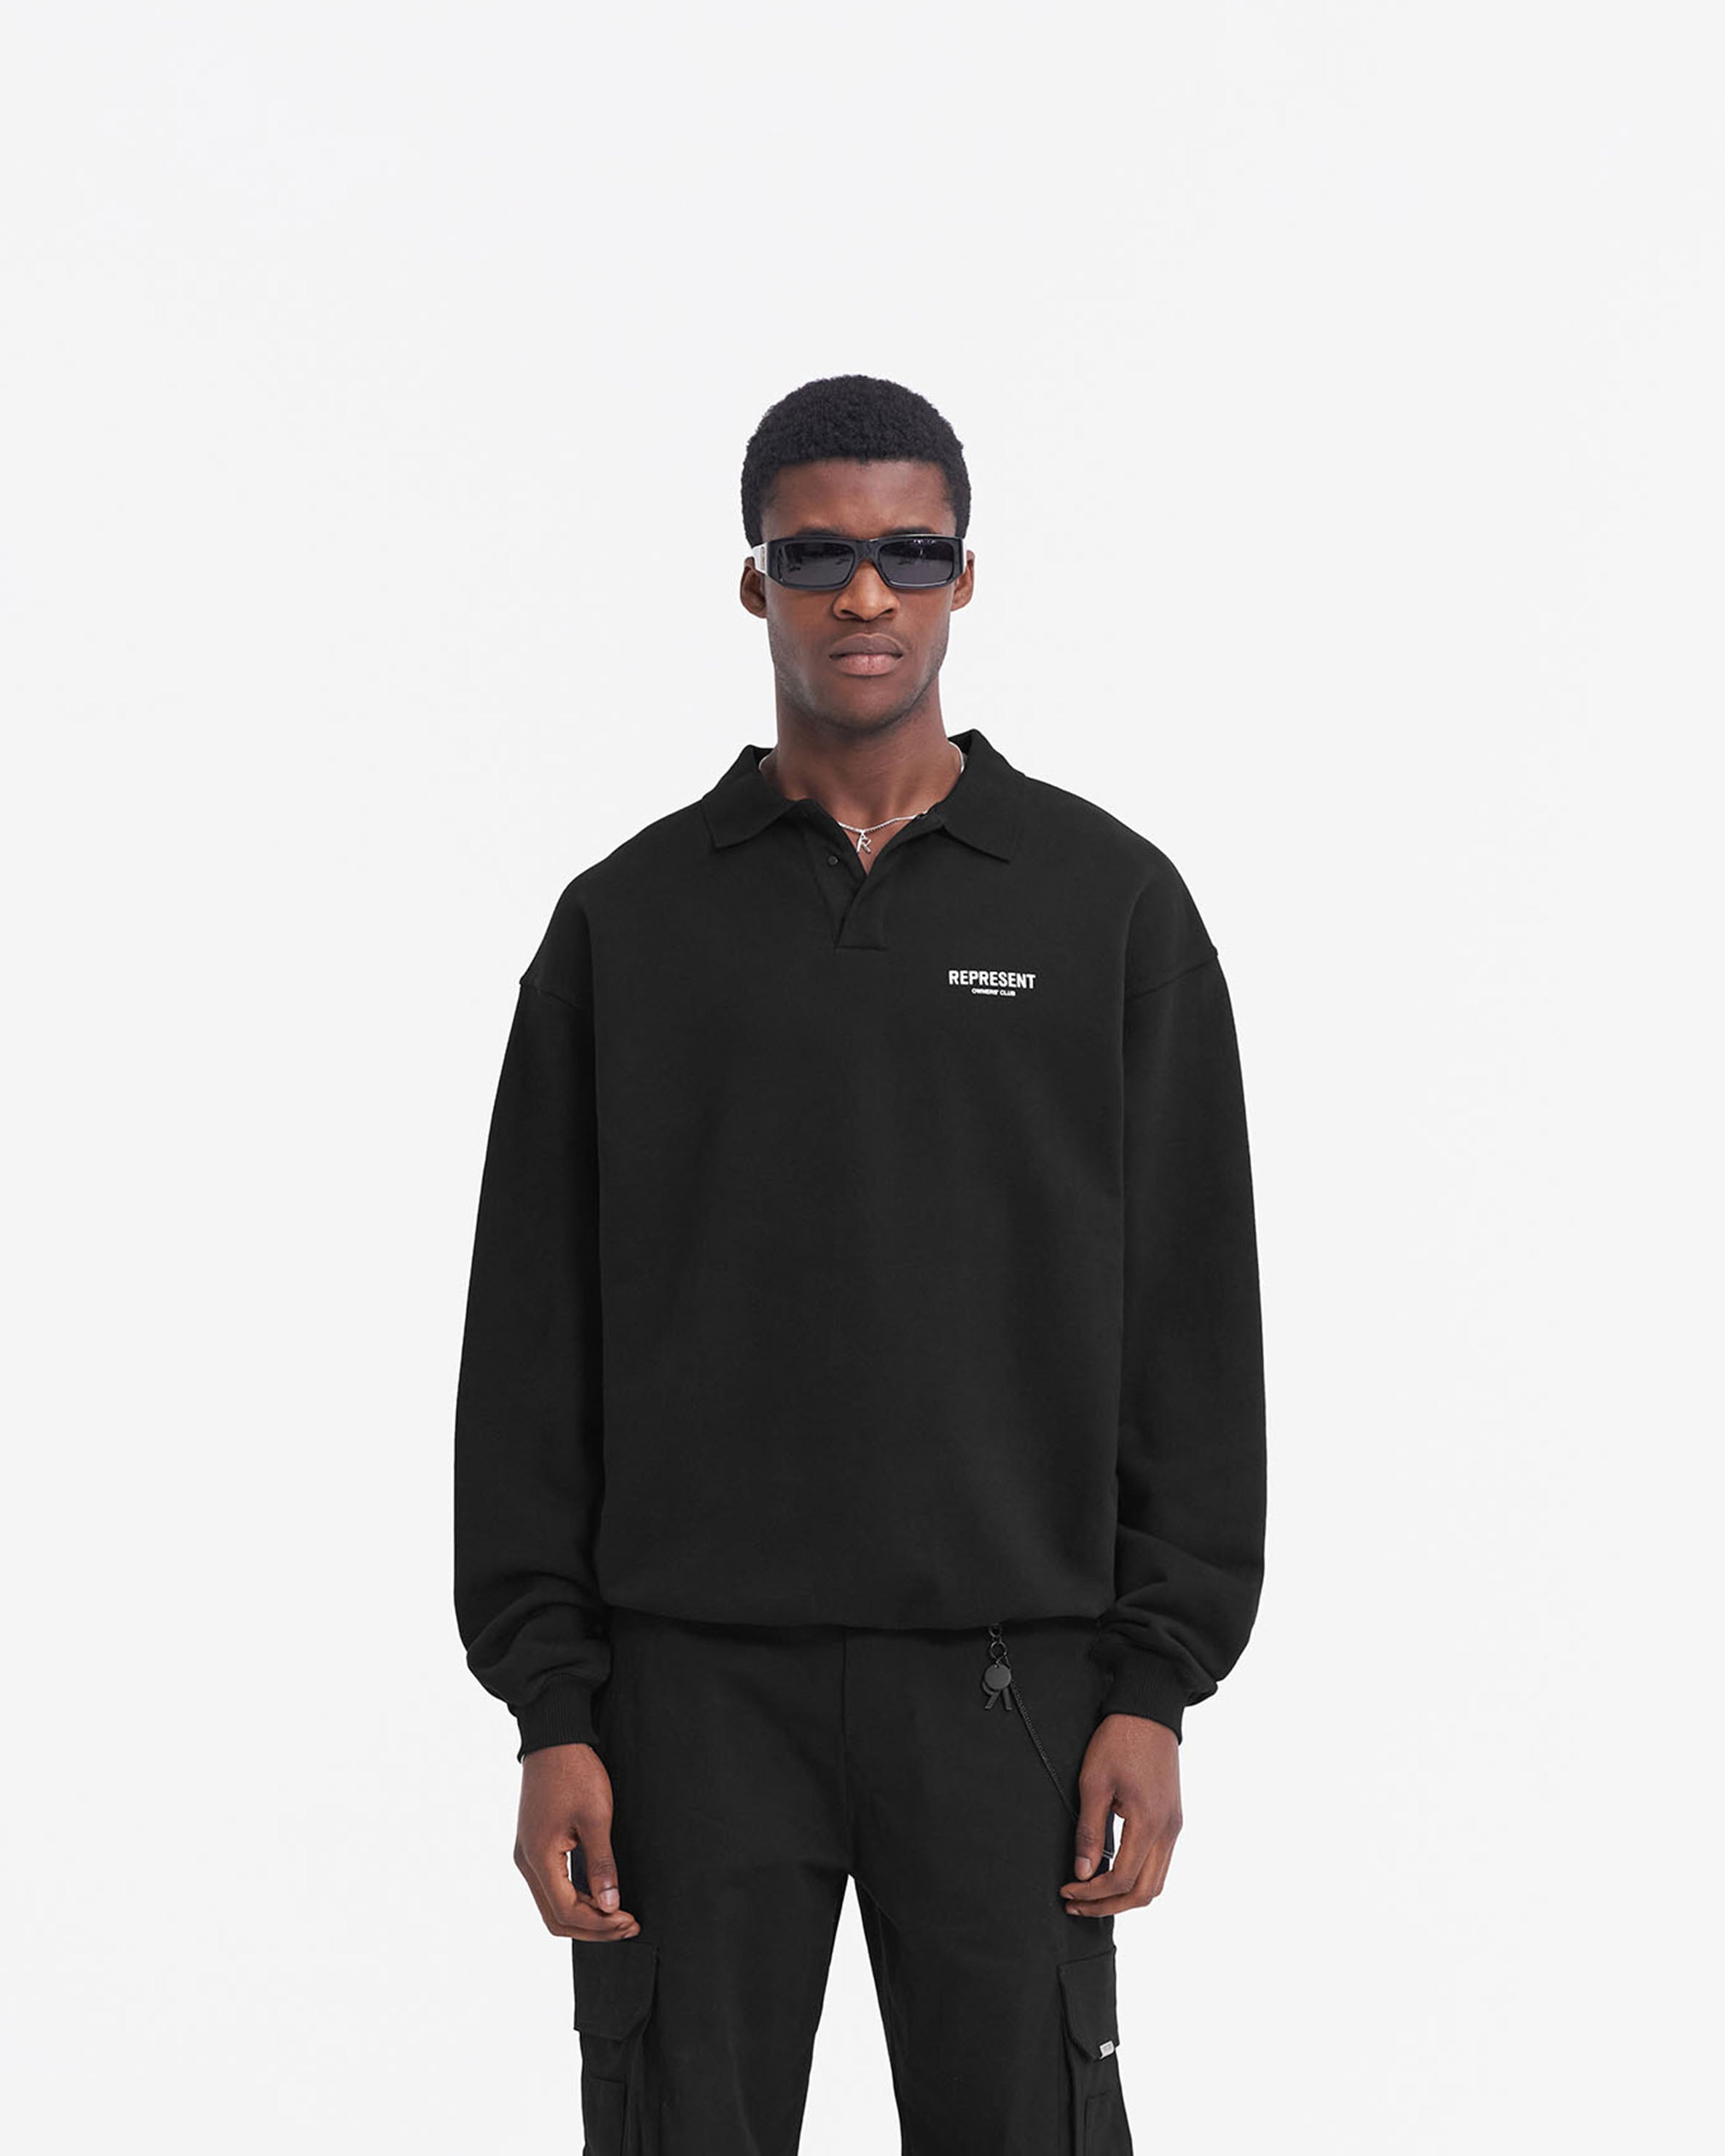 Represent Owners Club Long Sleeve Polo Sweater - Black